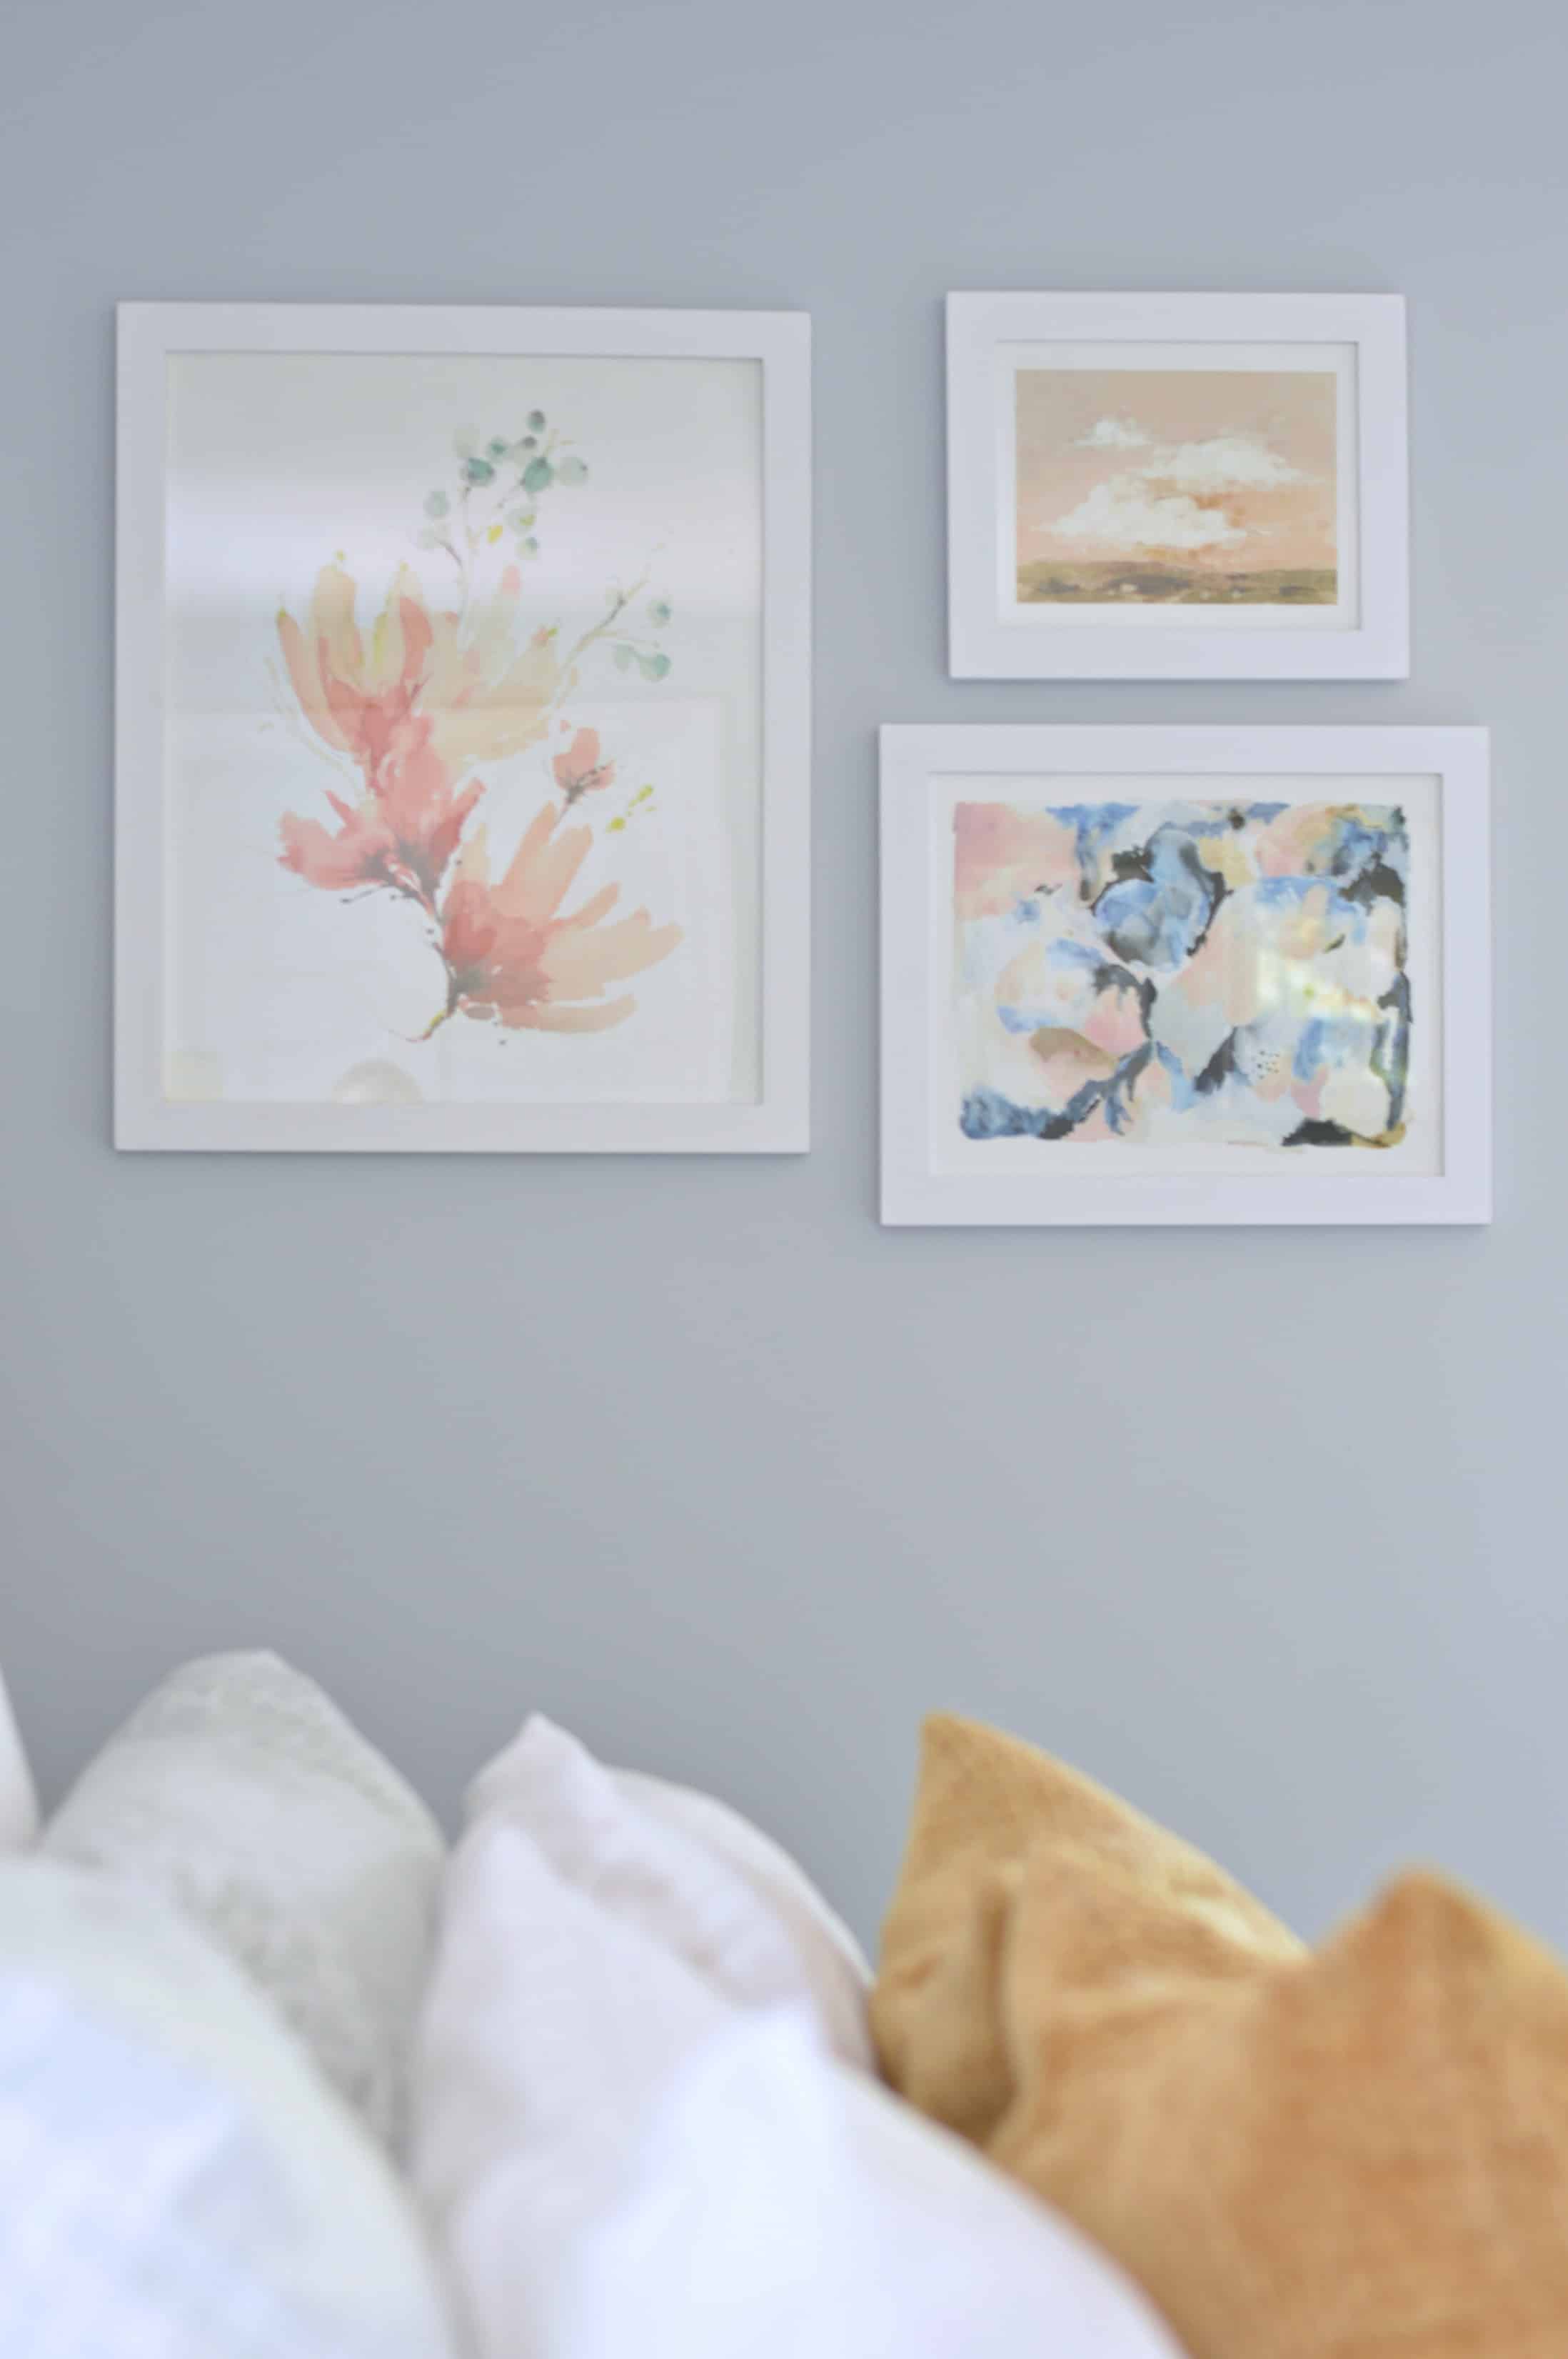 Beautiful wall art with pops of pink and blue from Minted.com